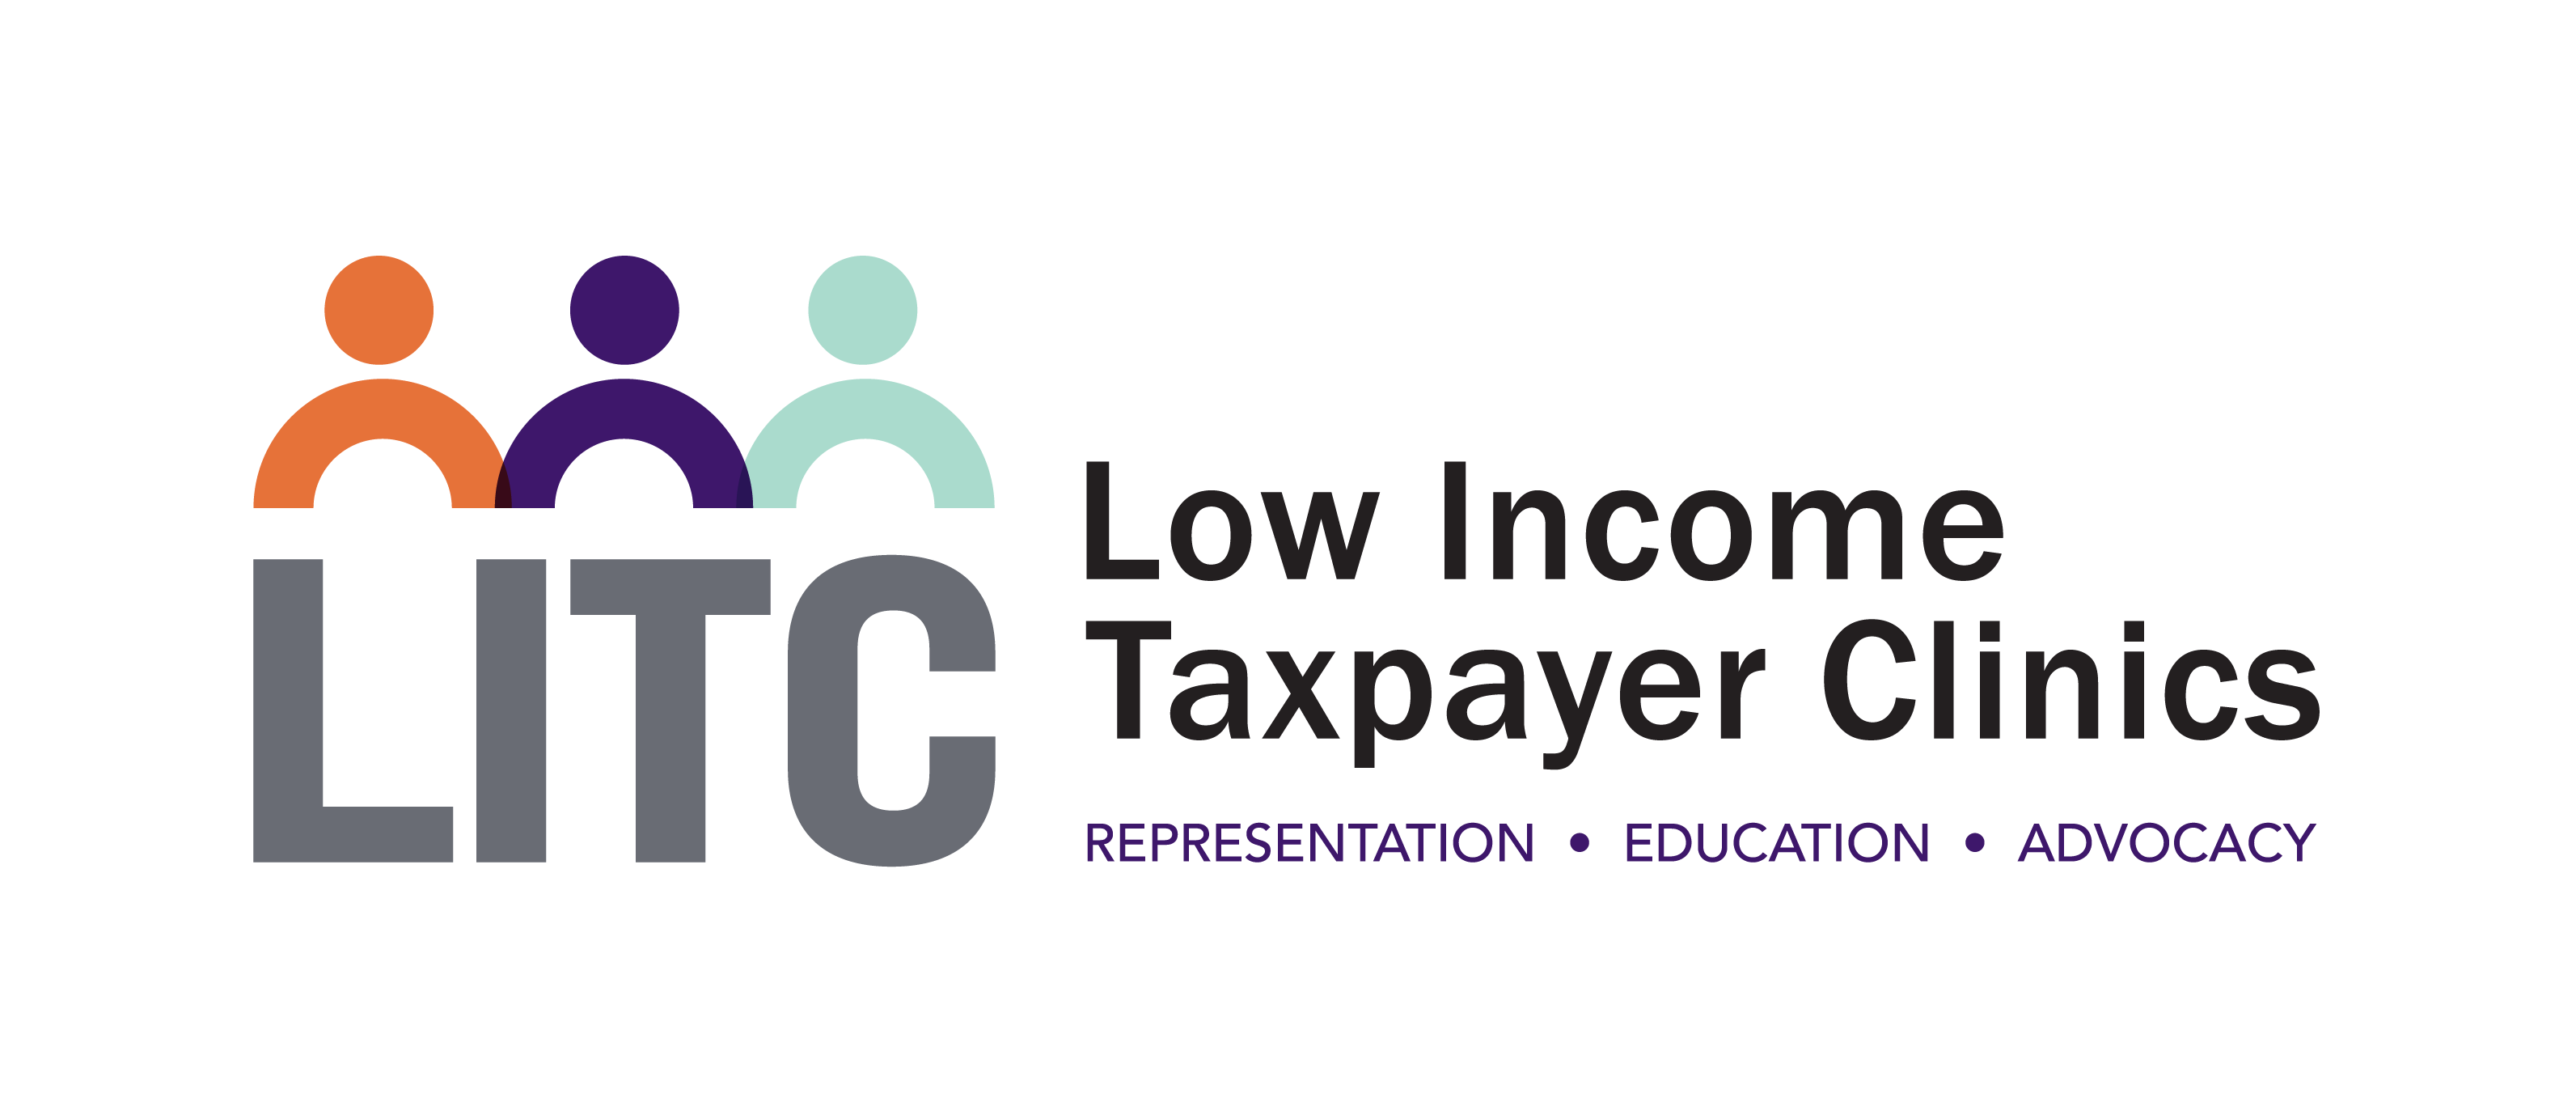 Low Income Taxpayer Clinics logo